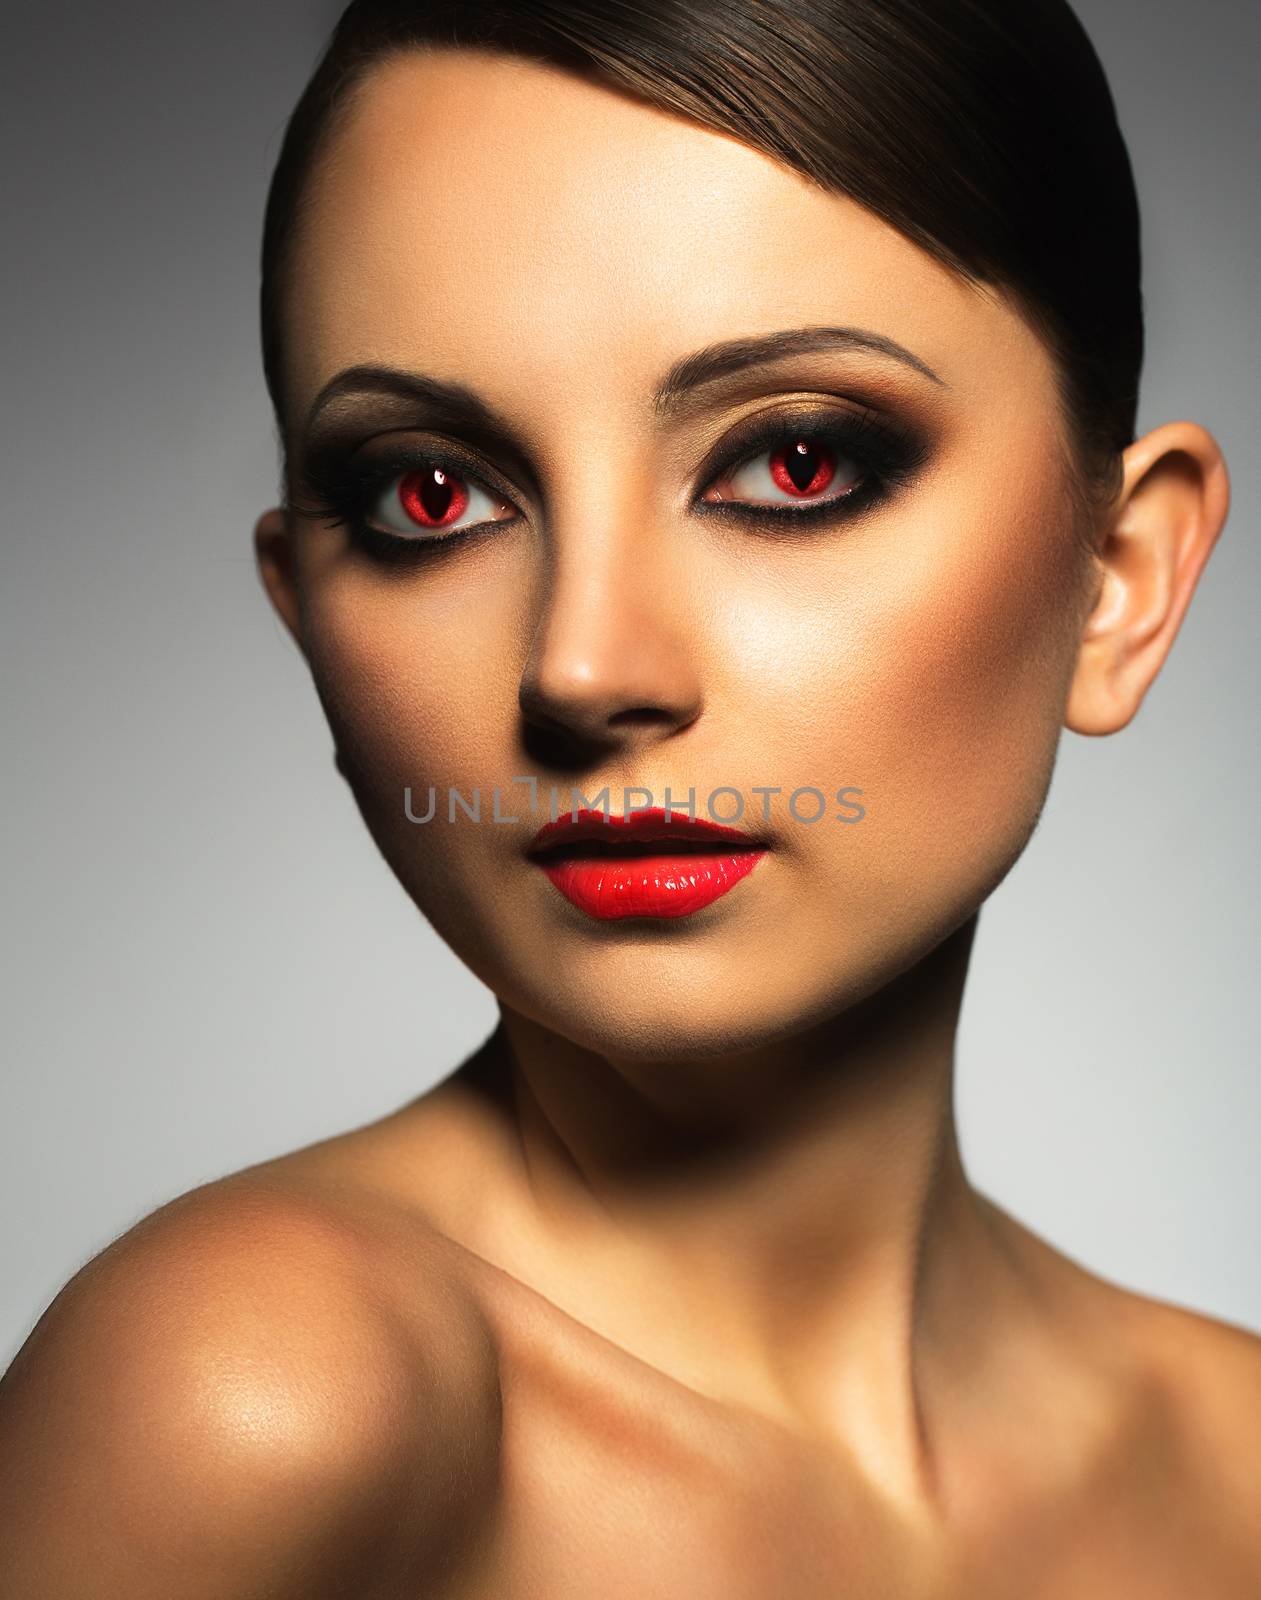 Portrait of a beautiful young woman vampire with a glamorous retro makeup